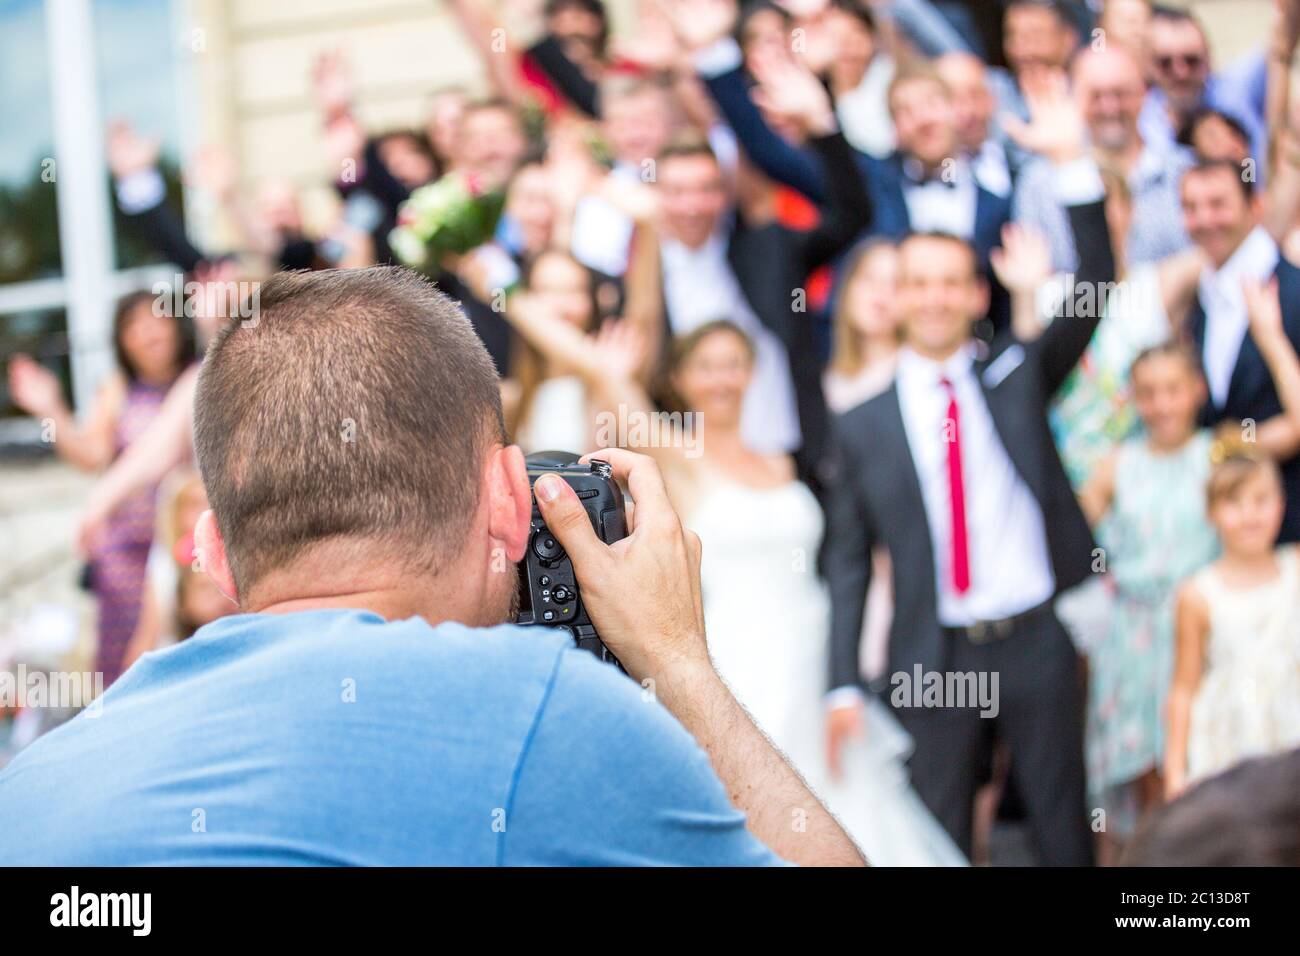 Wedding photographer in action, taking a picture of group of guests Stock Photo